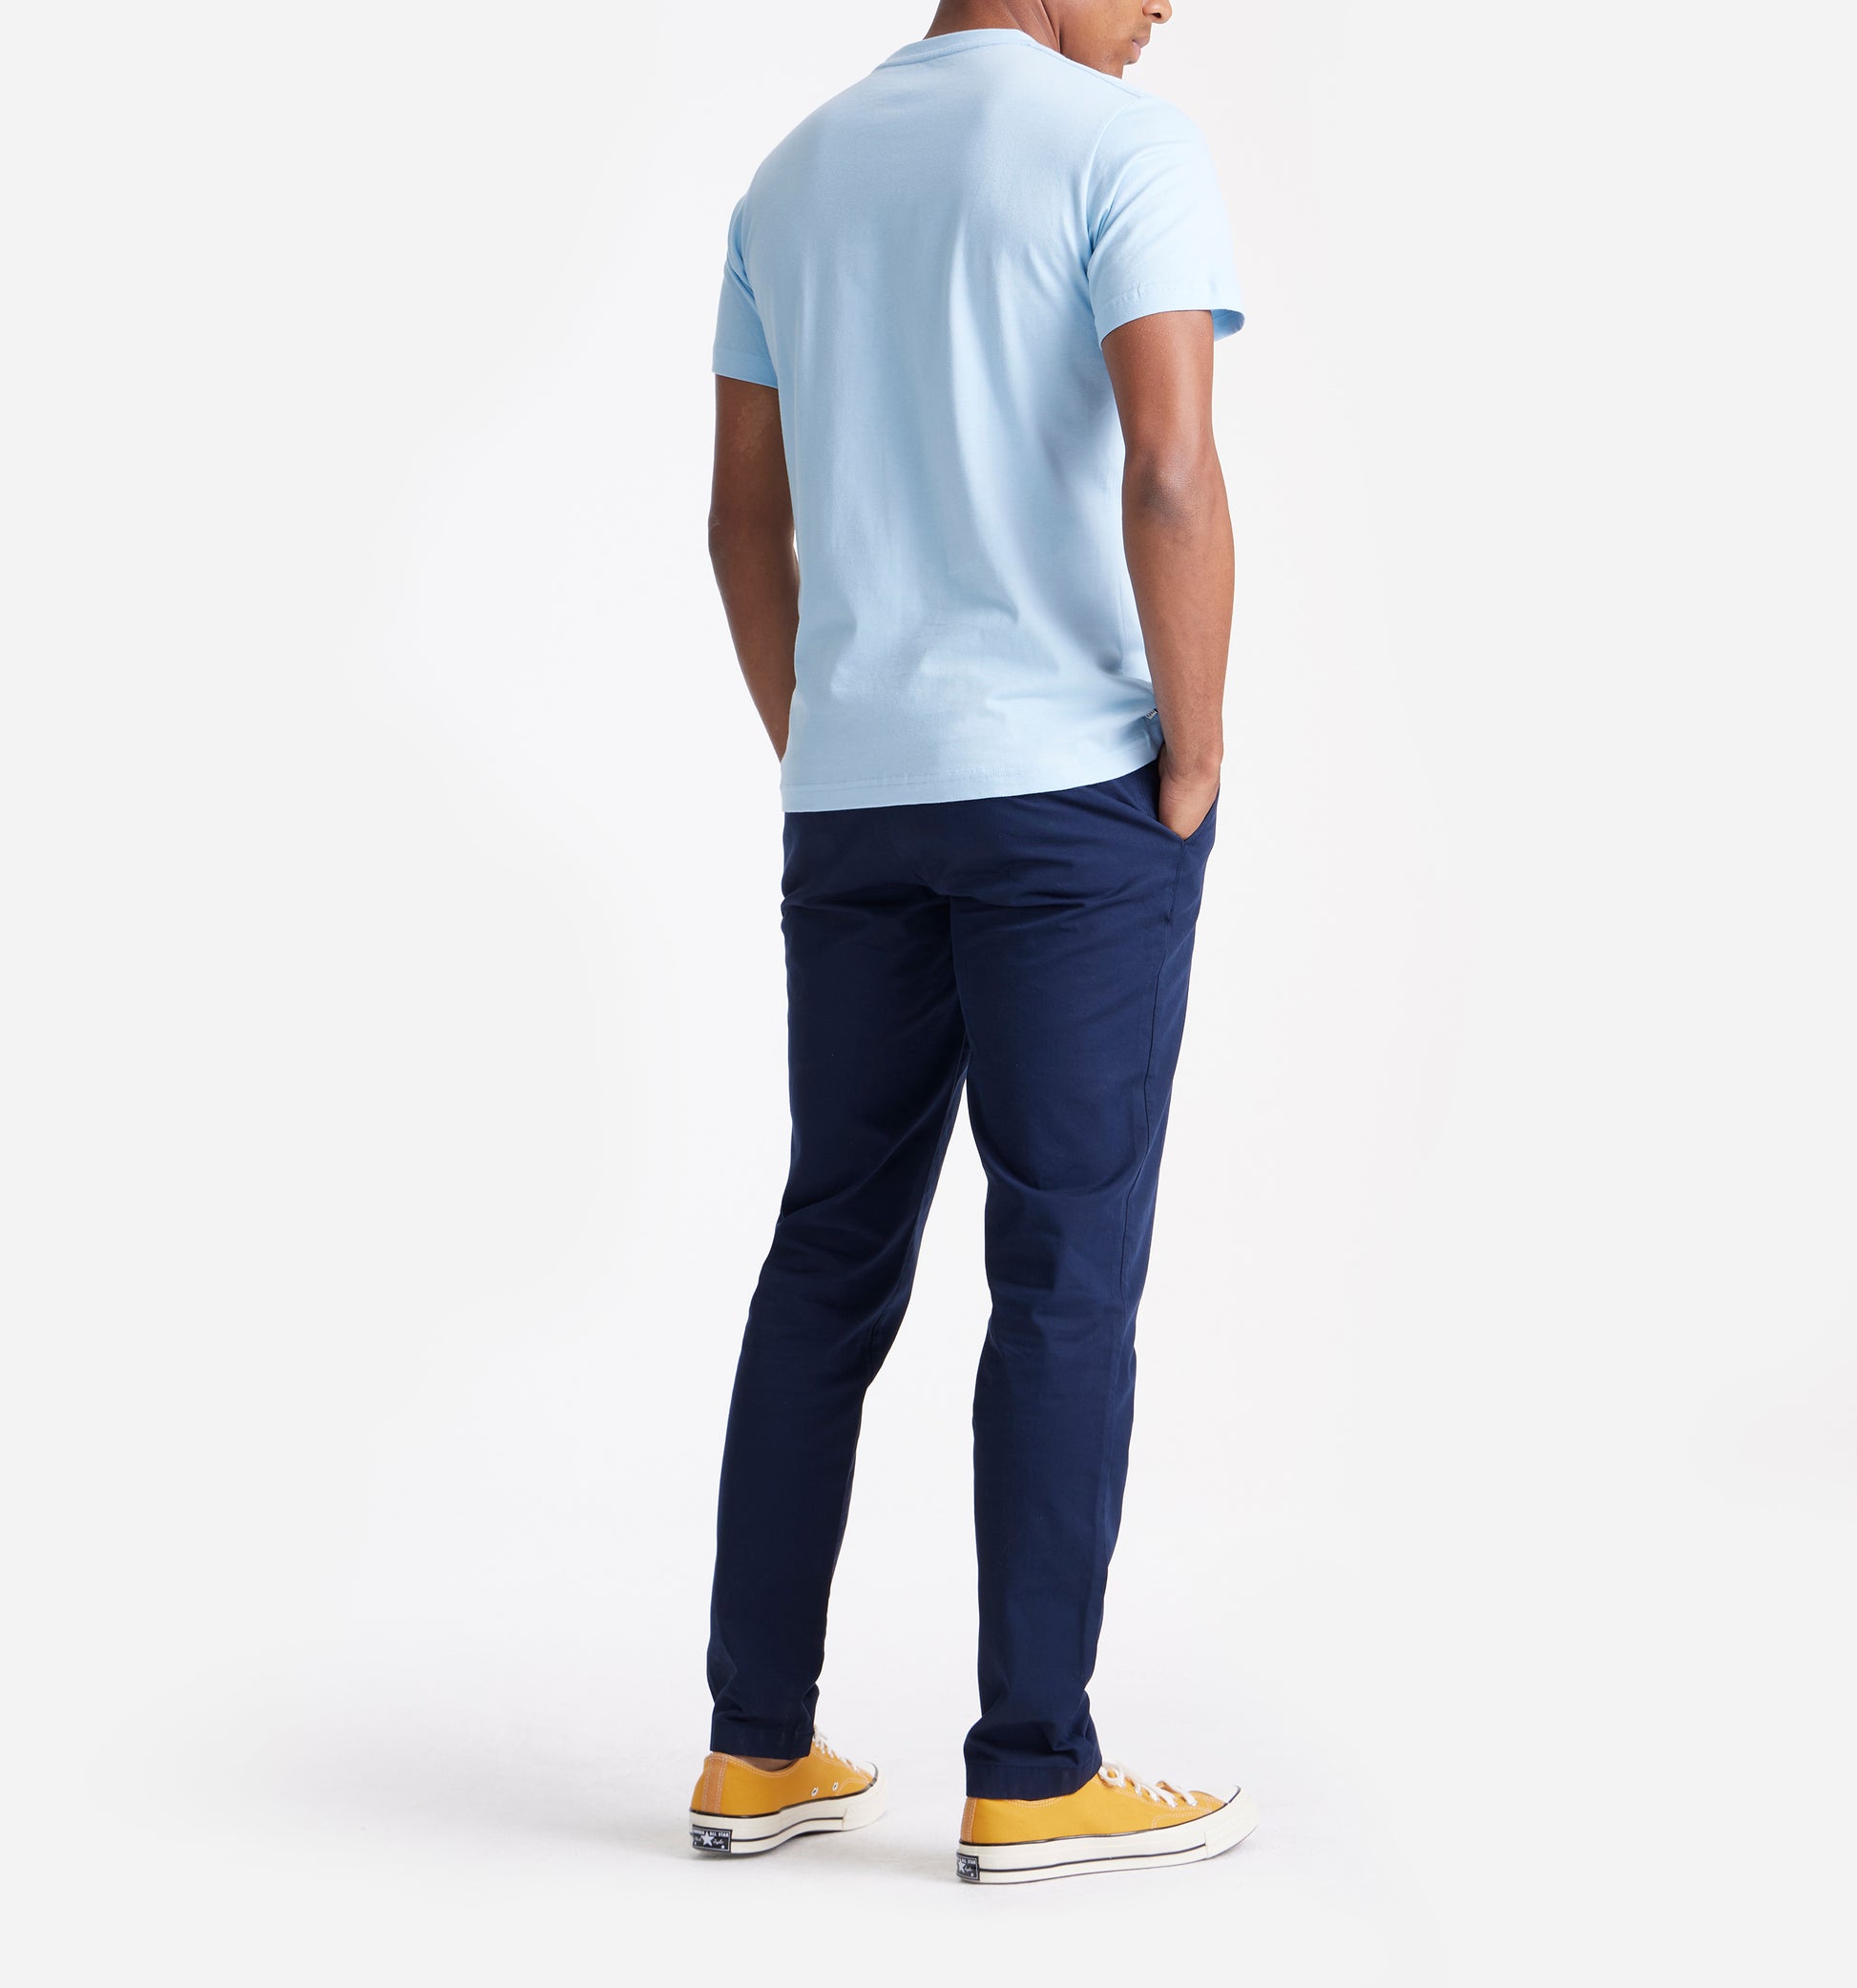 The Steve - Basic Cotton T-shirt In Light Blue From King Essentials